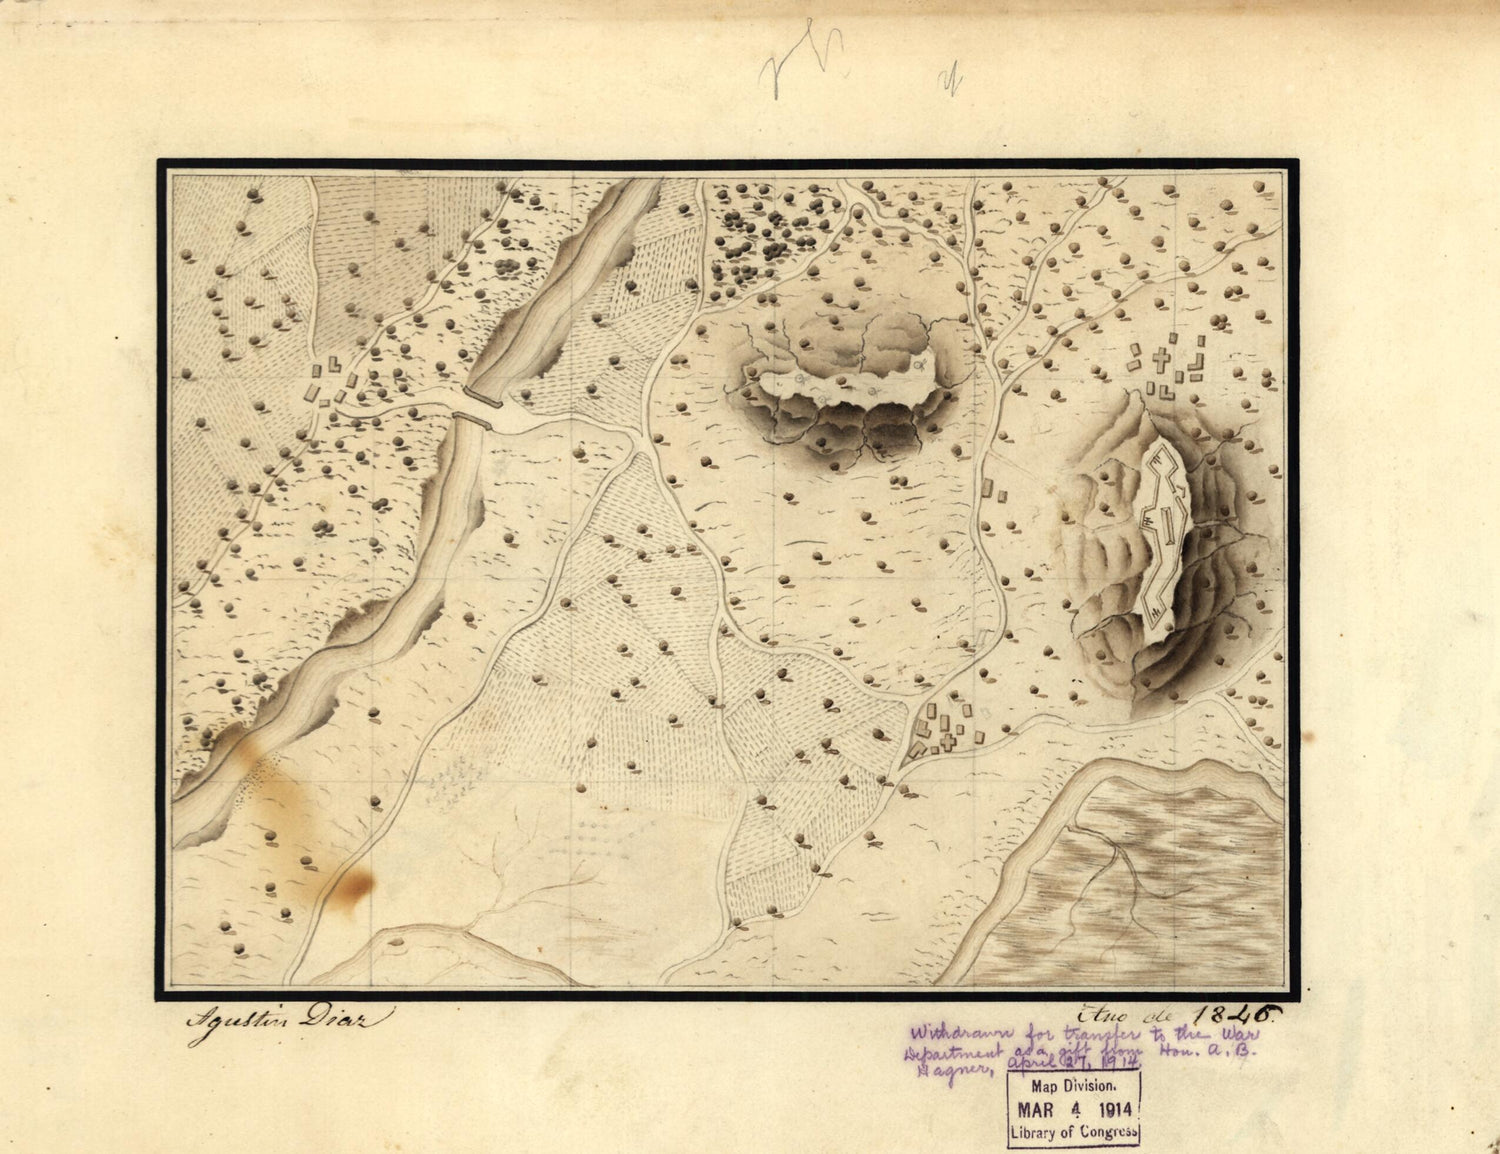 This old map of Military Training Map, Mexico from 1846 was created by Agustin Diaz in 1846